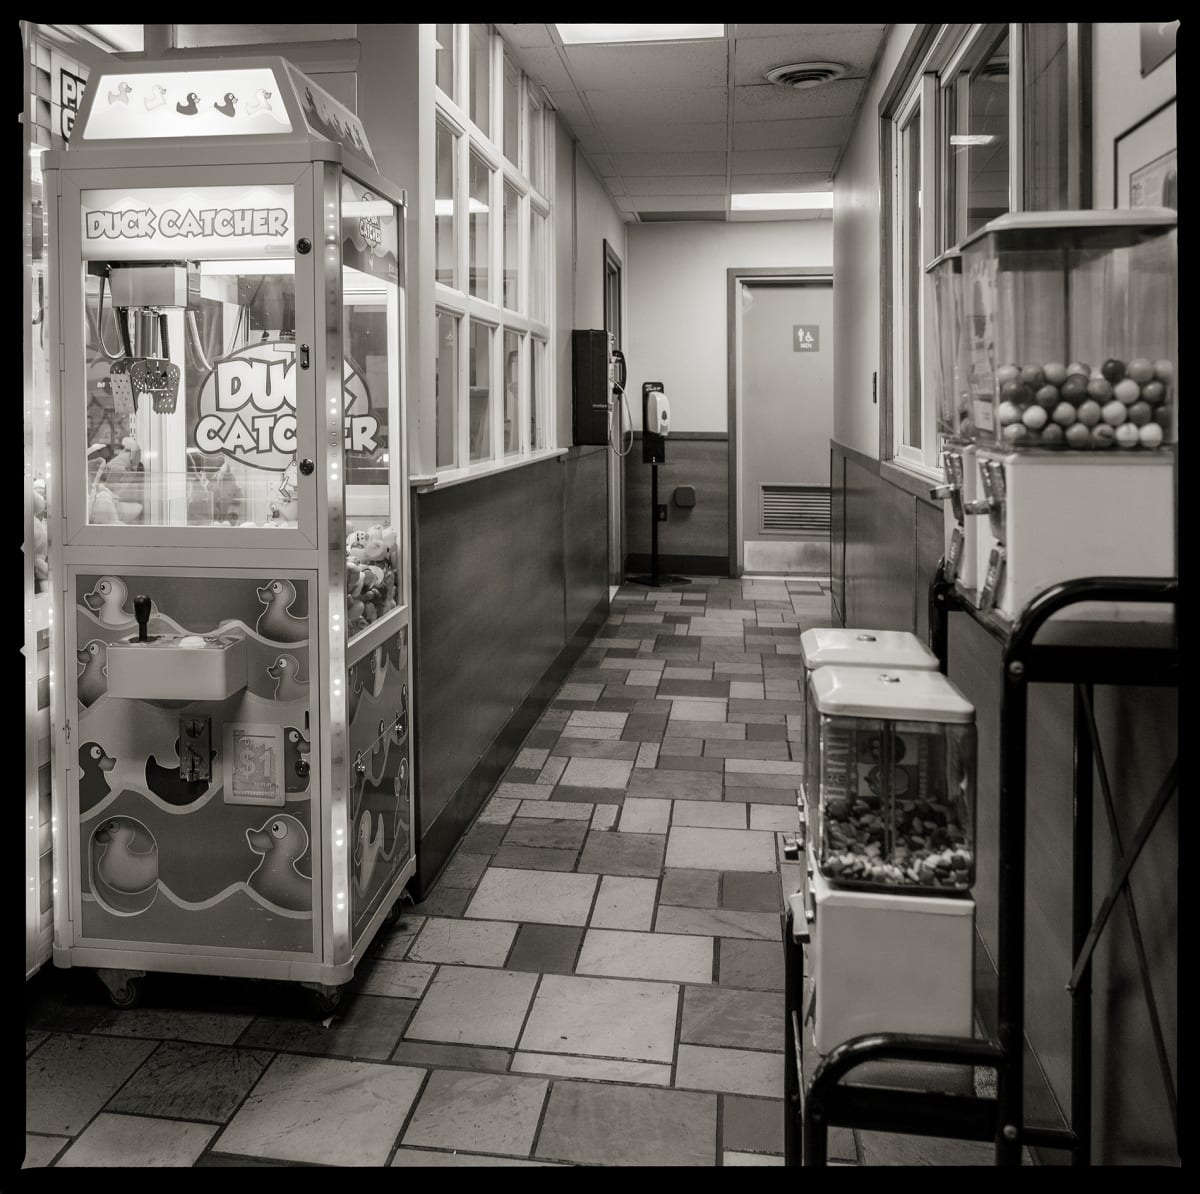 585.663.9688 – Schaller’s, 965 Edgemere Drive, Rochester, NY 14612 by Eric T. Kunsman  Image: ID: A black and white image shows a corridor with a payphone on the left wall.  There is a rubber duck claw machine on the left and gum ball machines on the right.  The floor is a patterned tile.